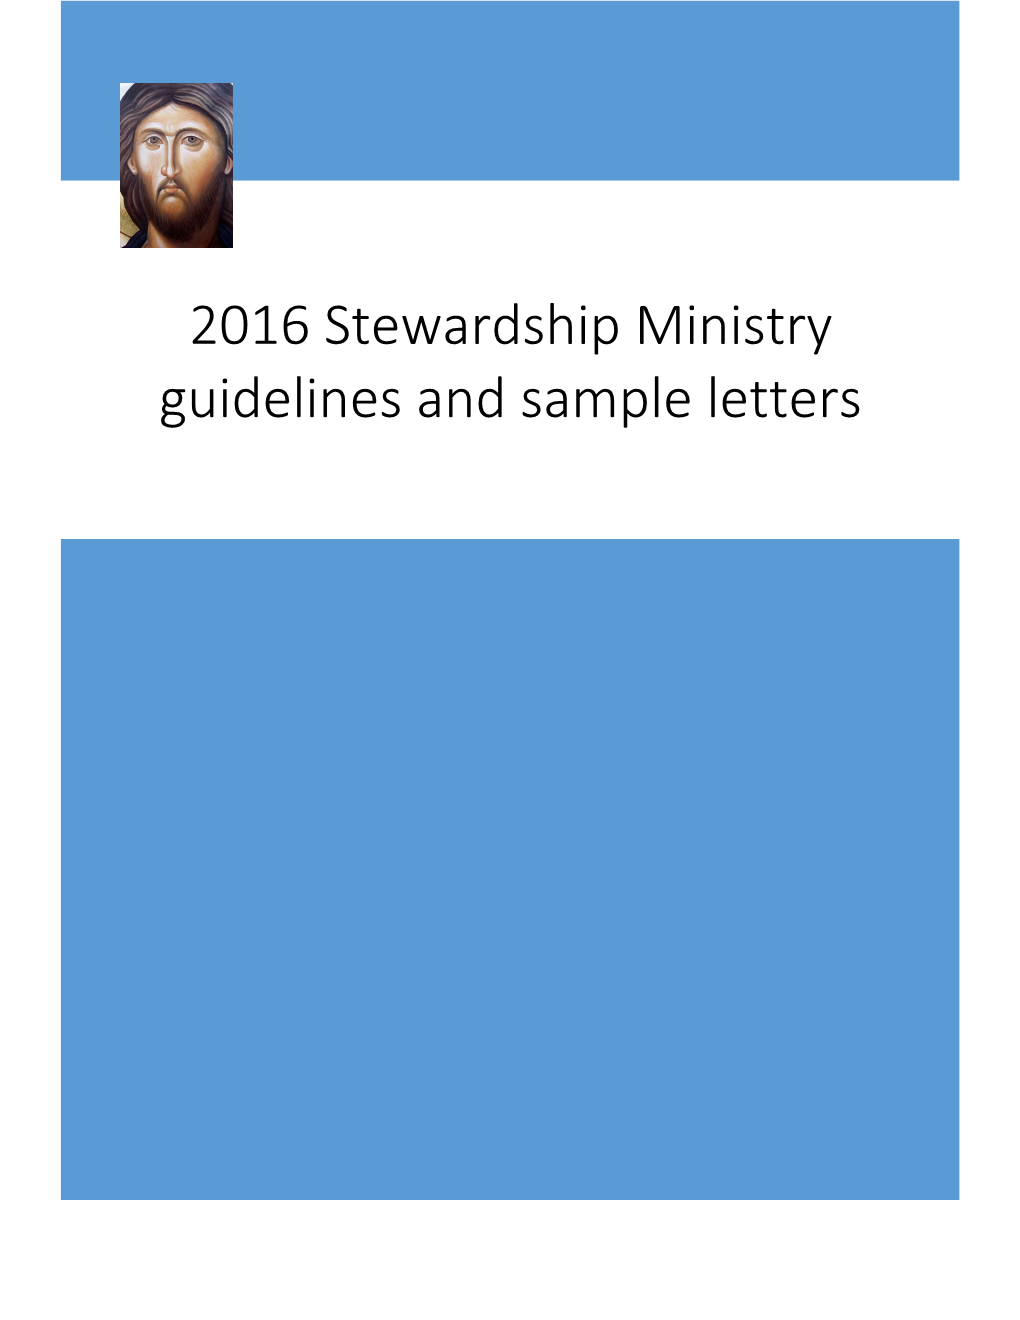 2016 Stewardship Ministry Guidelines and Sample Letters